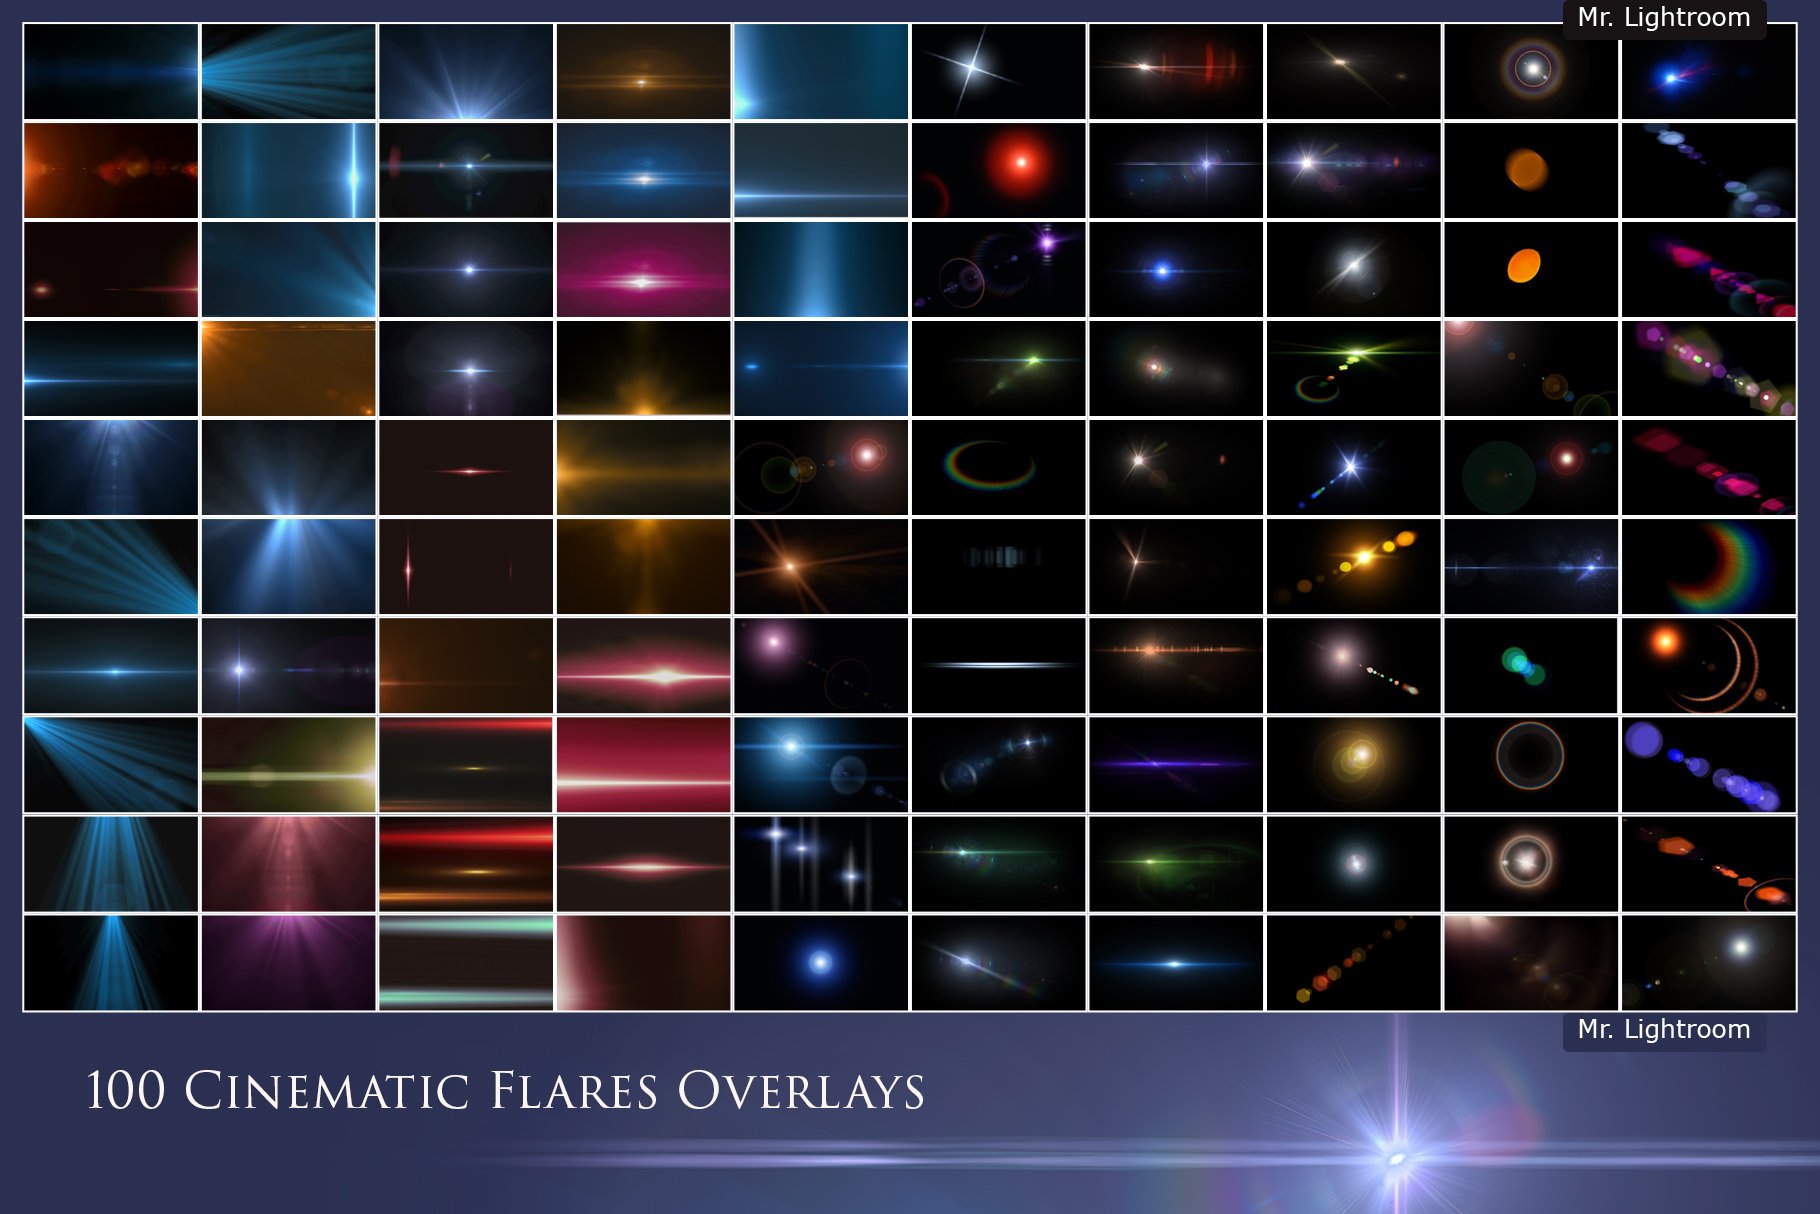 100 Cinematic Flares Overlayspreview image.